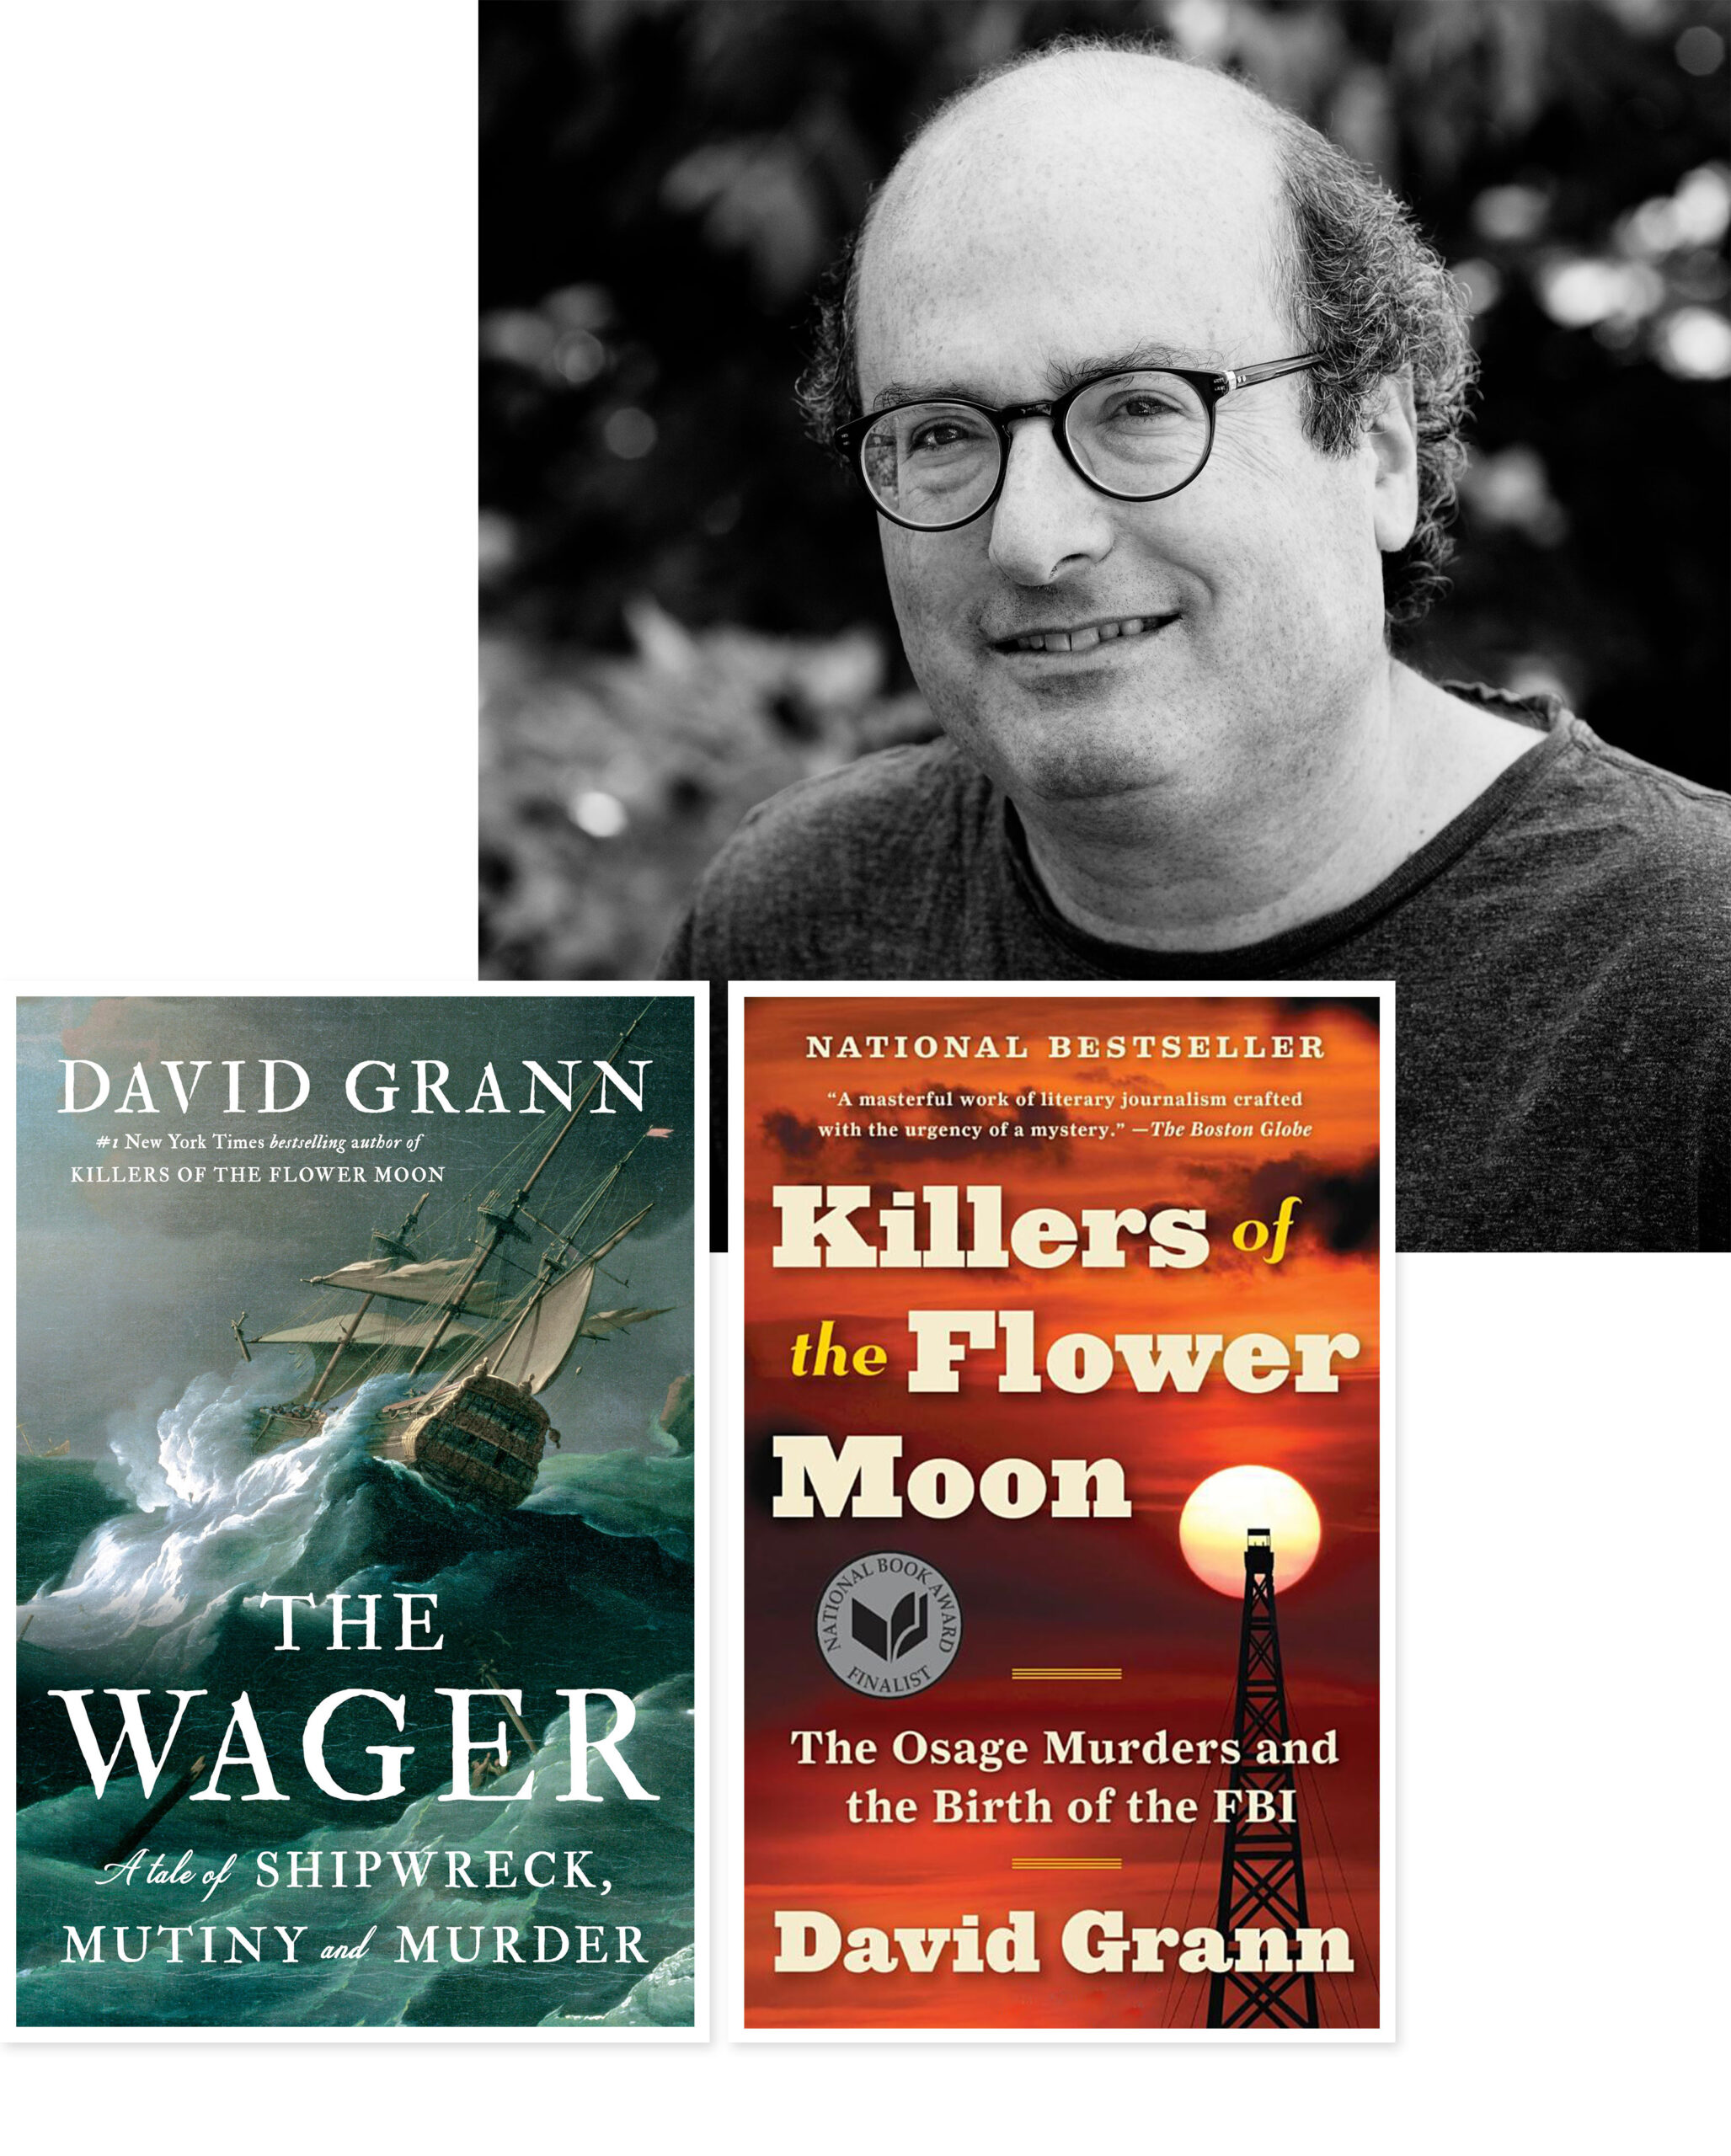 David Grann with his books, The Wager: A Tale of Shipwreck, Mutiny and Murder & Killers of the Flower Moon: The Osage Murders and the Birth of the FBI